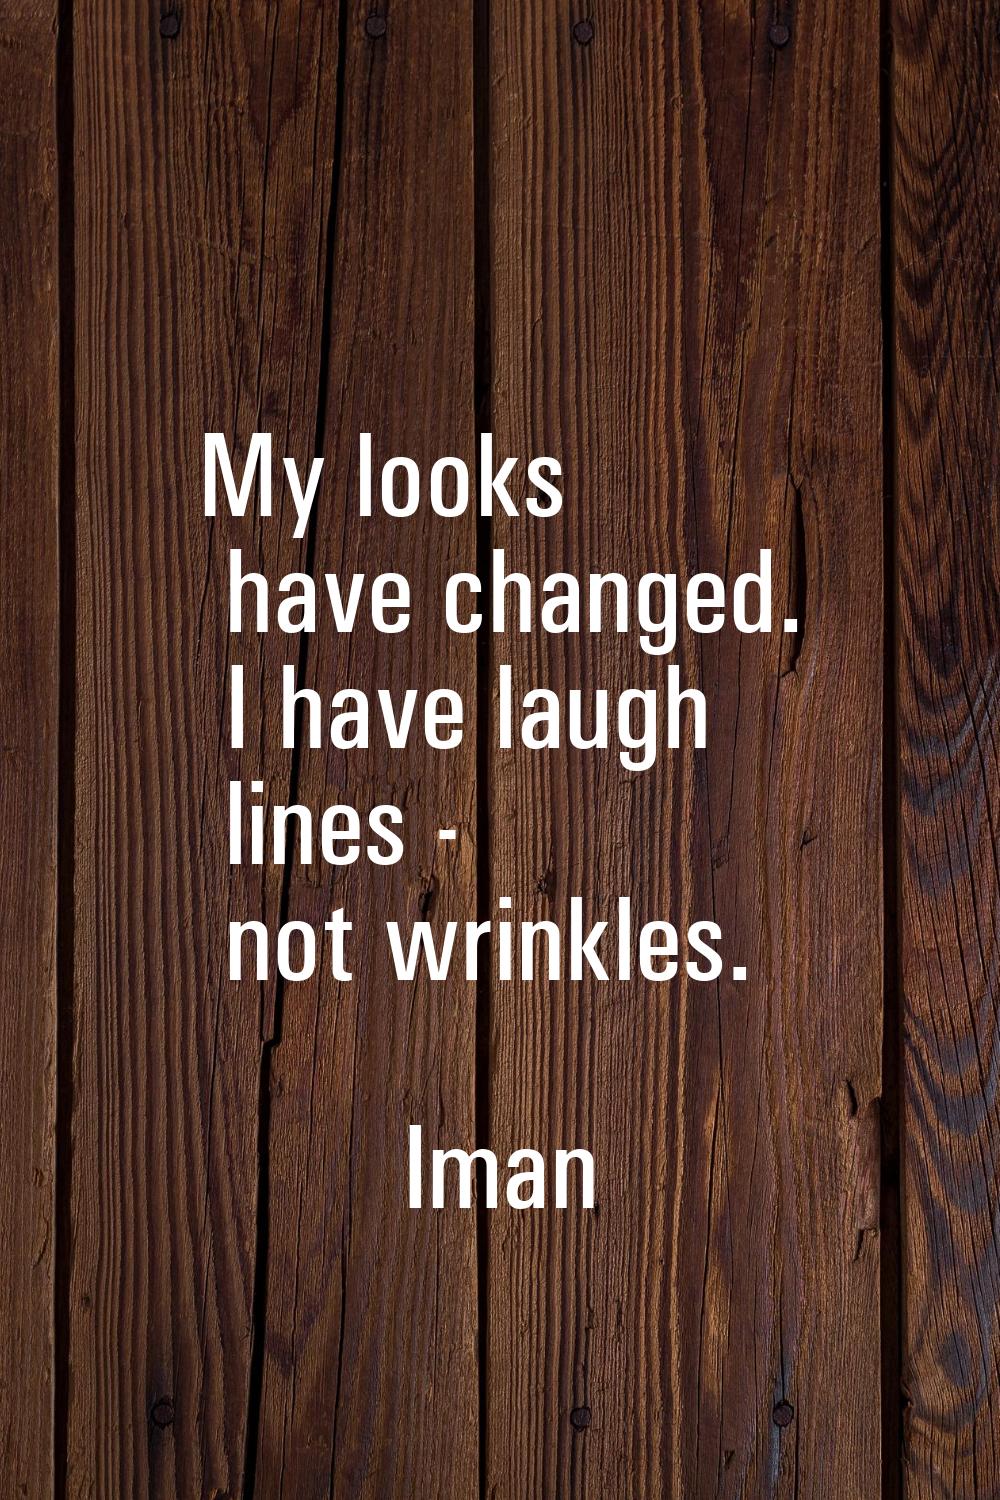 My looks have changed. I have laugh lines - not wrinkles.